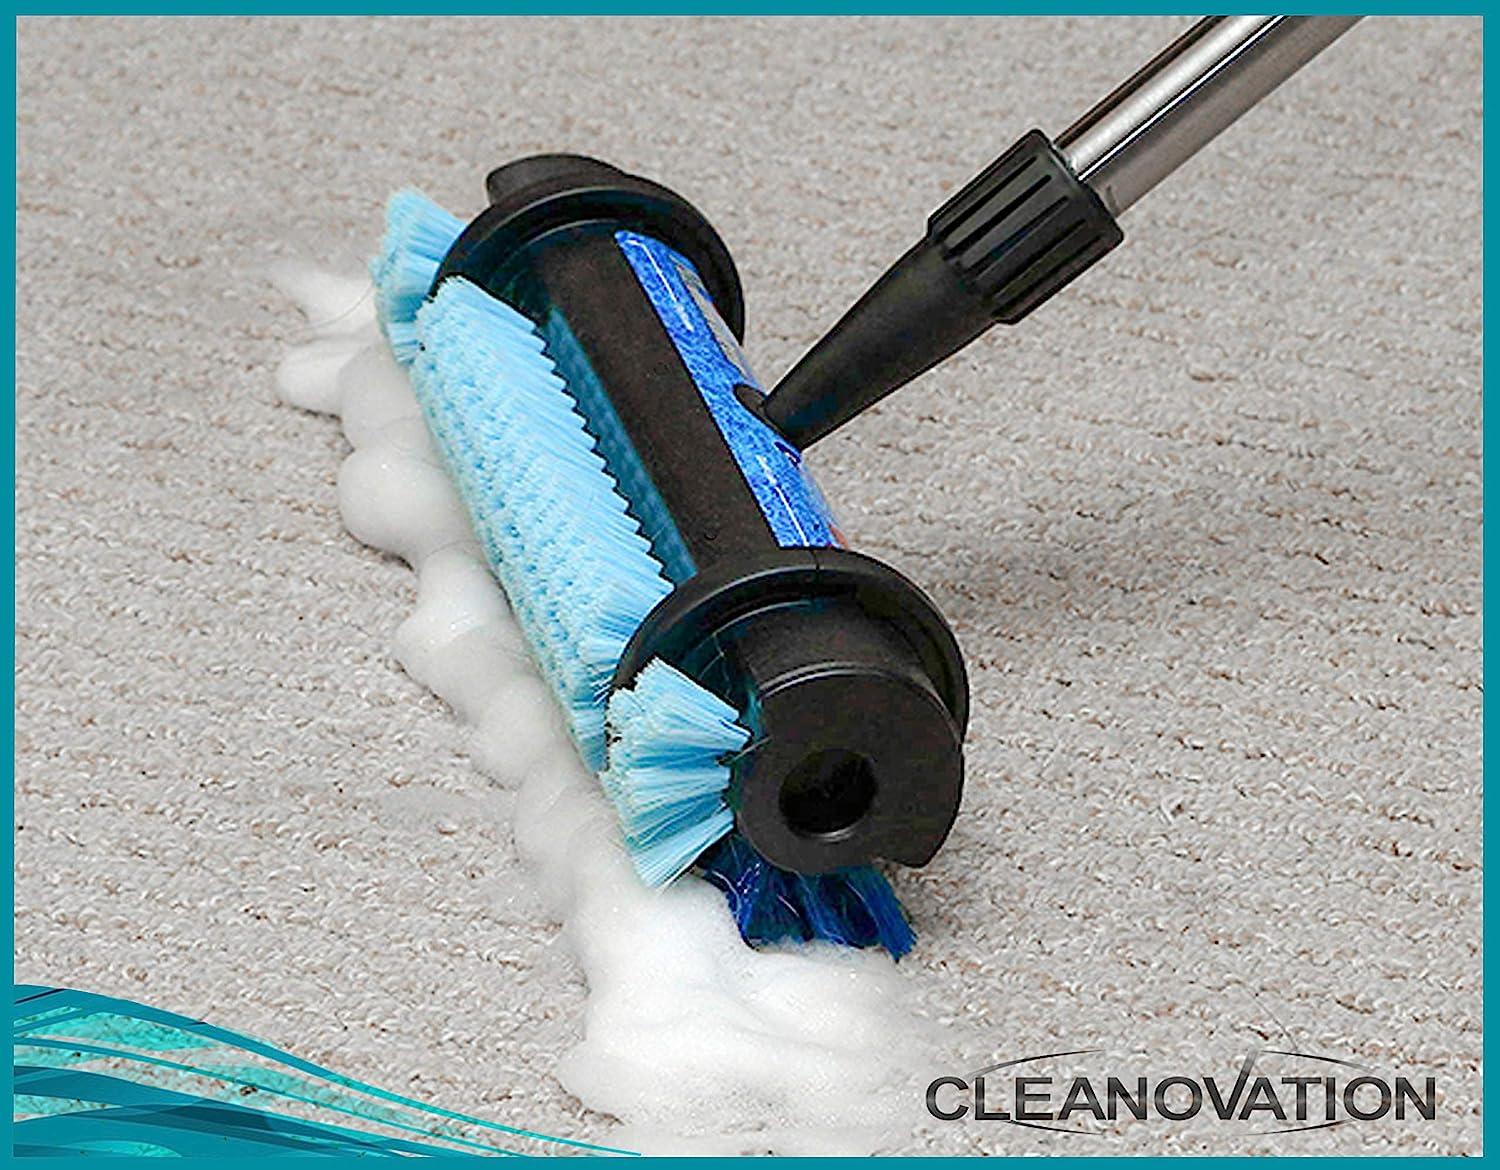 Cleanovation Rug Renovator, Carpet Scrubber and Cleaning Brush with 32 oz  Foaming Carpet Shampoo, Remove Cat and Dog Pet Stains, Dirt Spots, and Wine  Spills